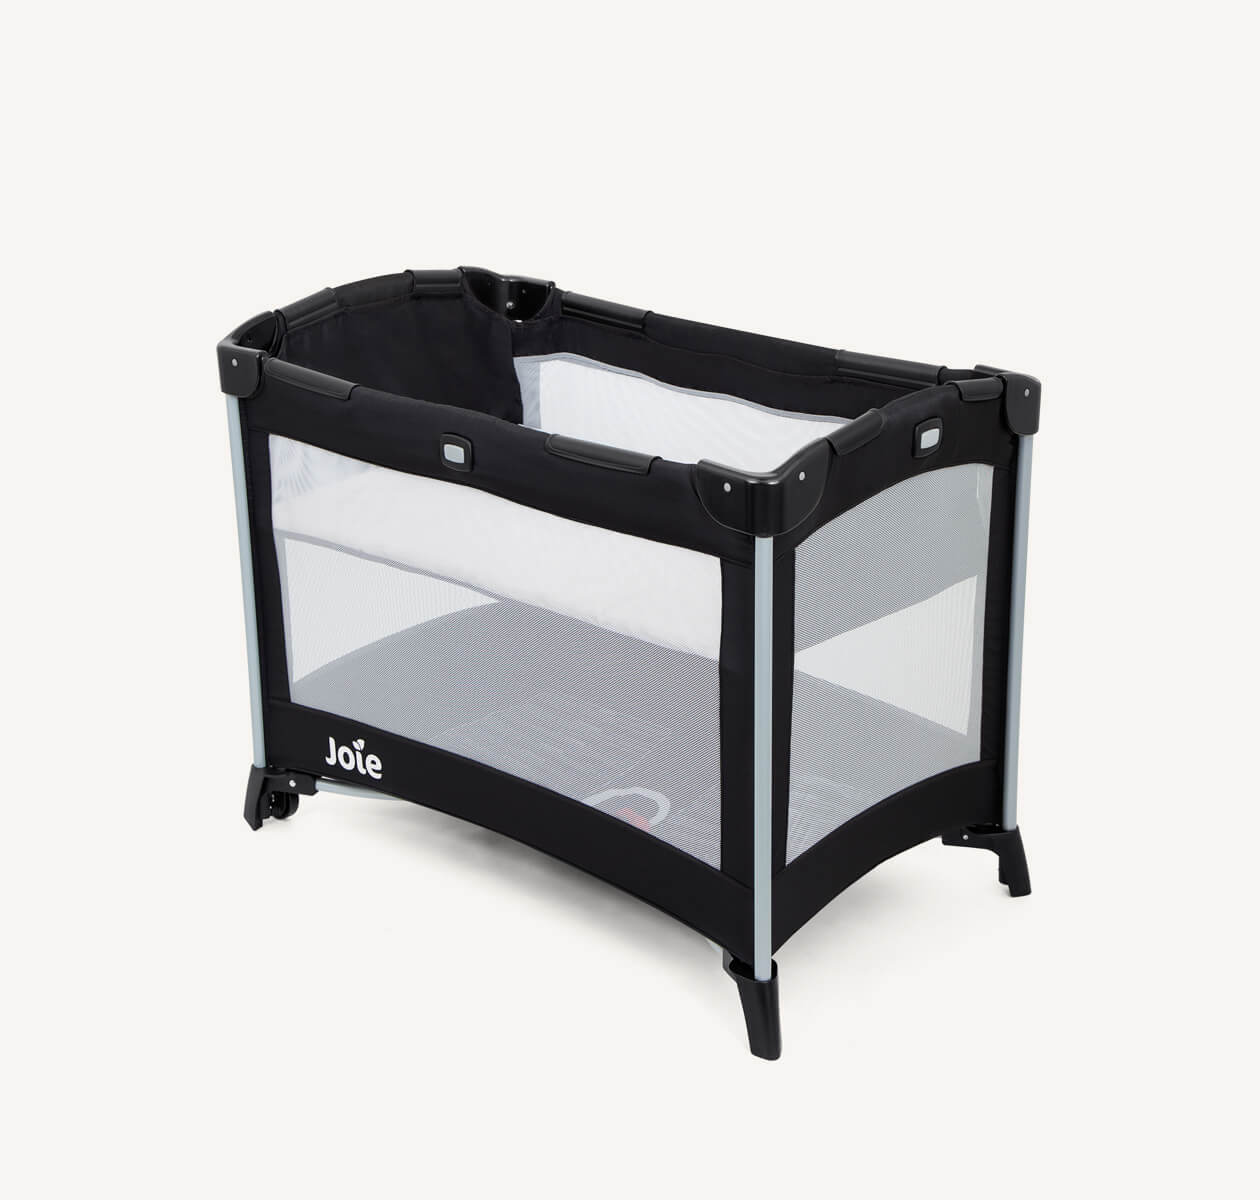 Joie Kubbie travel cot with bassinet in black, at an angle facing left.